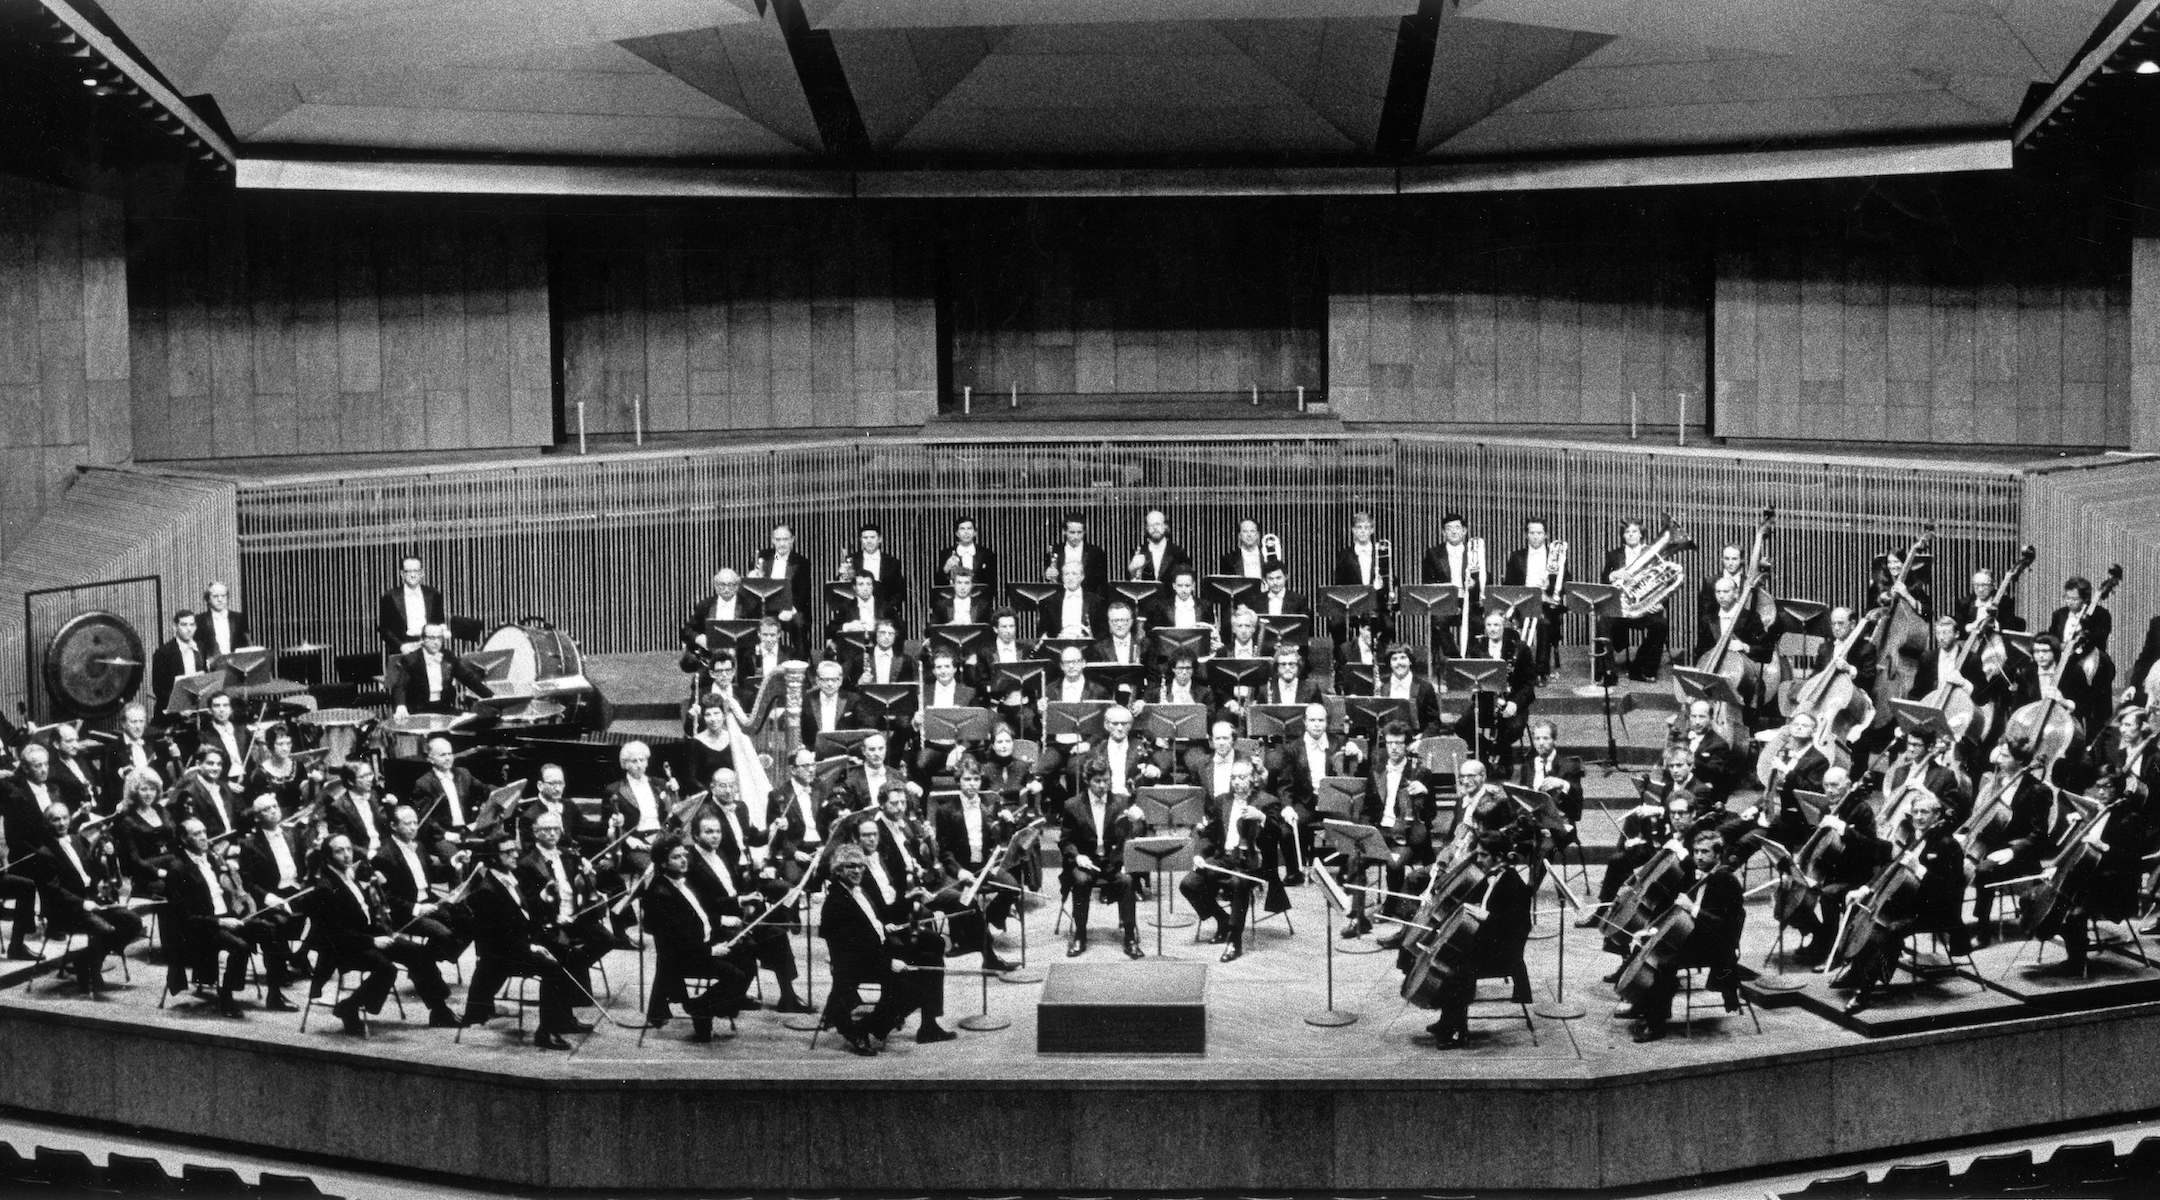 The Israel Philharmonic Orchestra